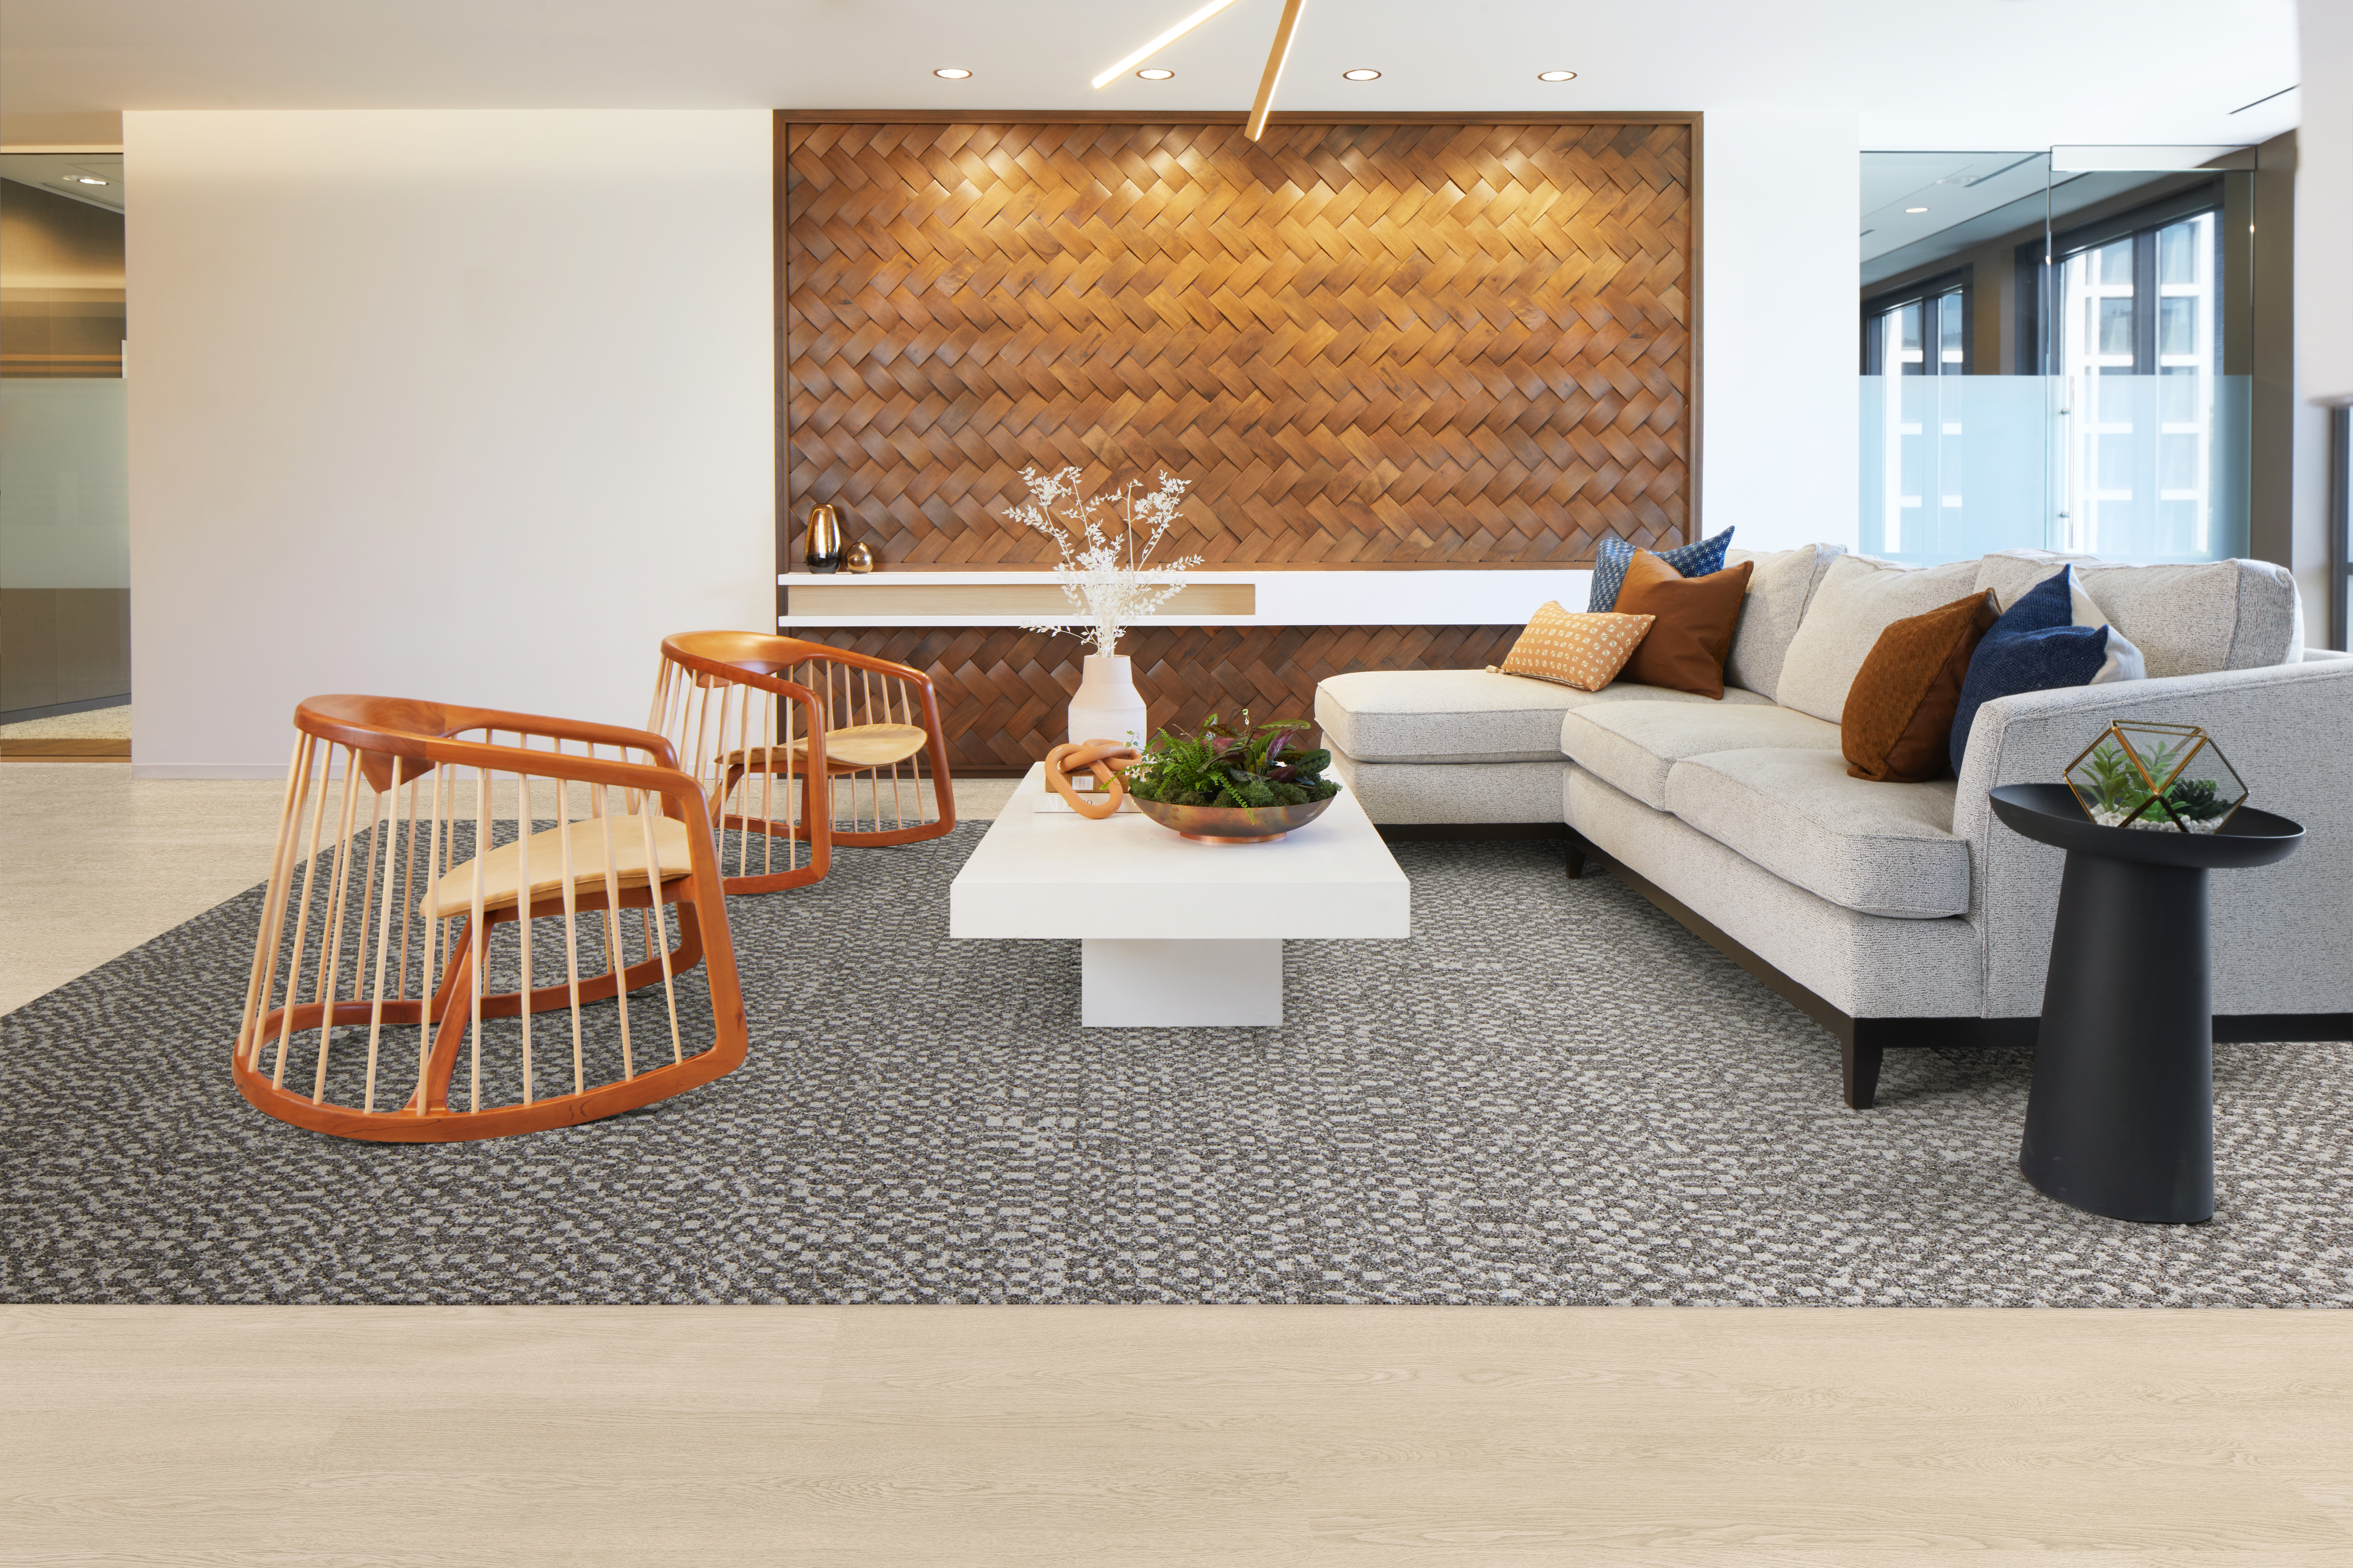 Third Space 312 carpet tile with Northern Grain LVT in corporate lobby